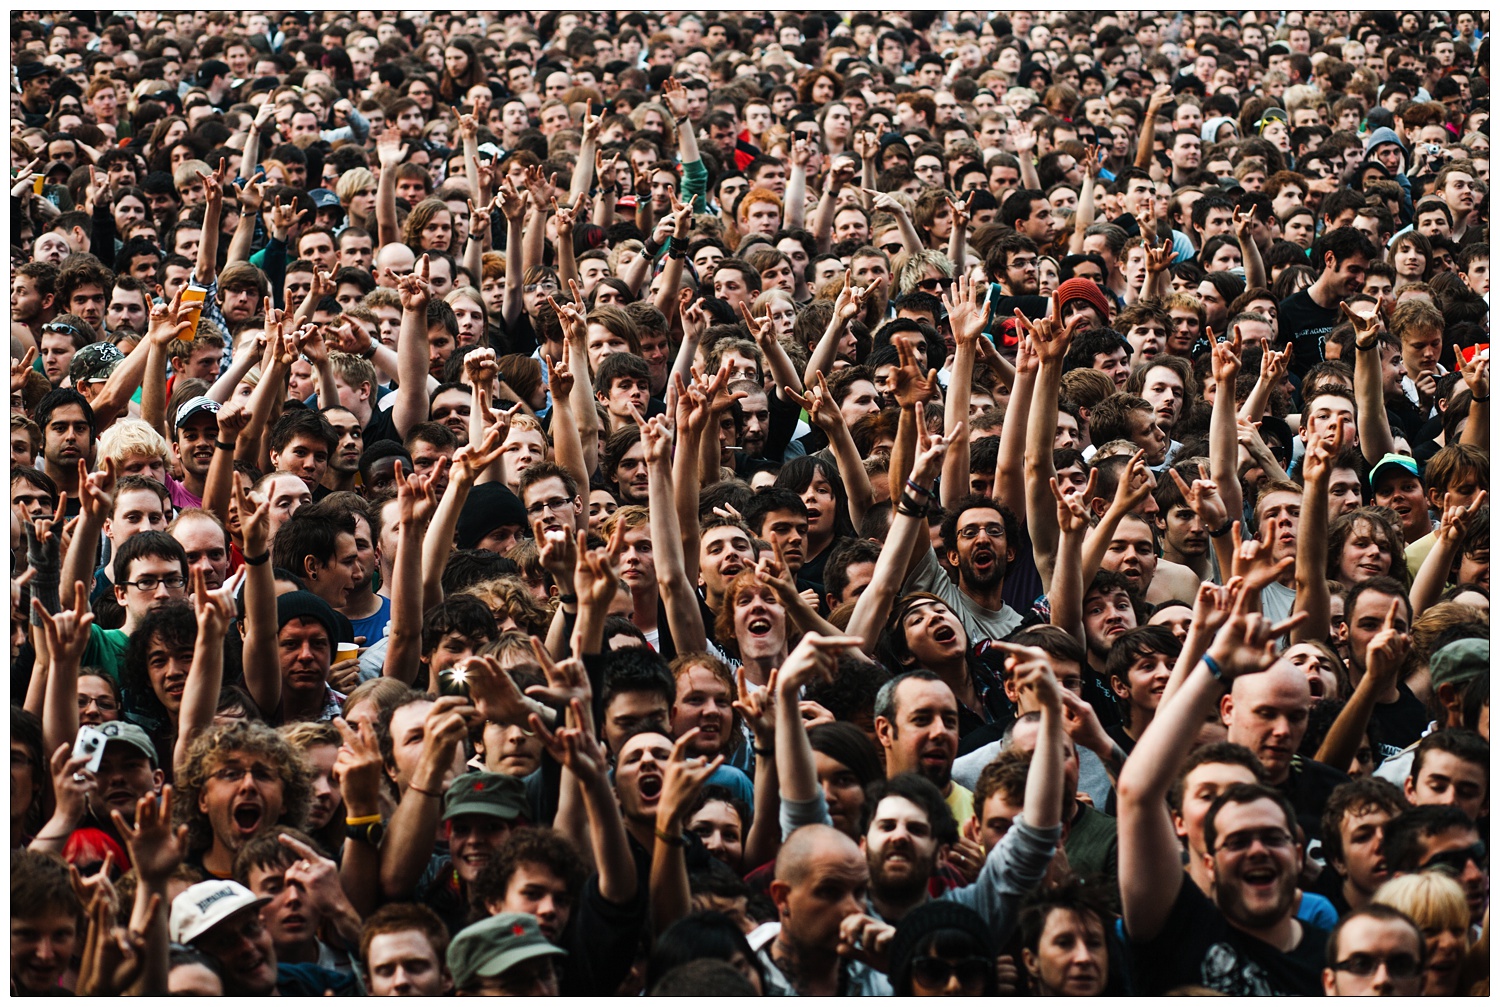 packed crowd at Rage Against the Machine gig in 2010